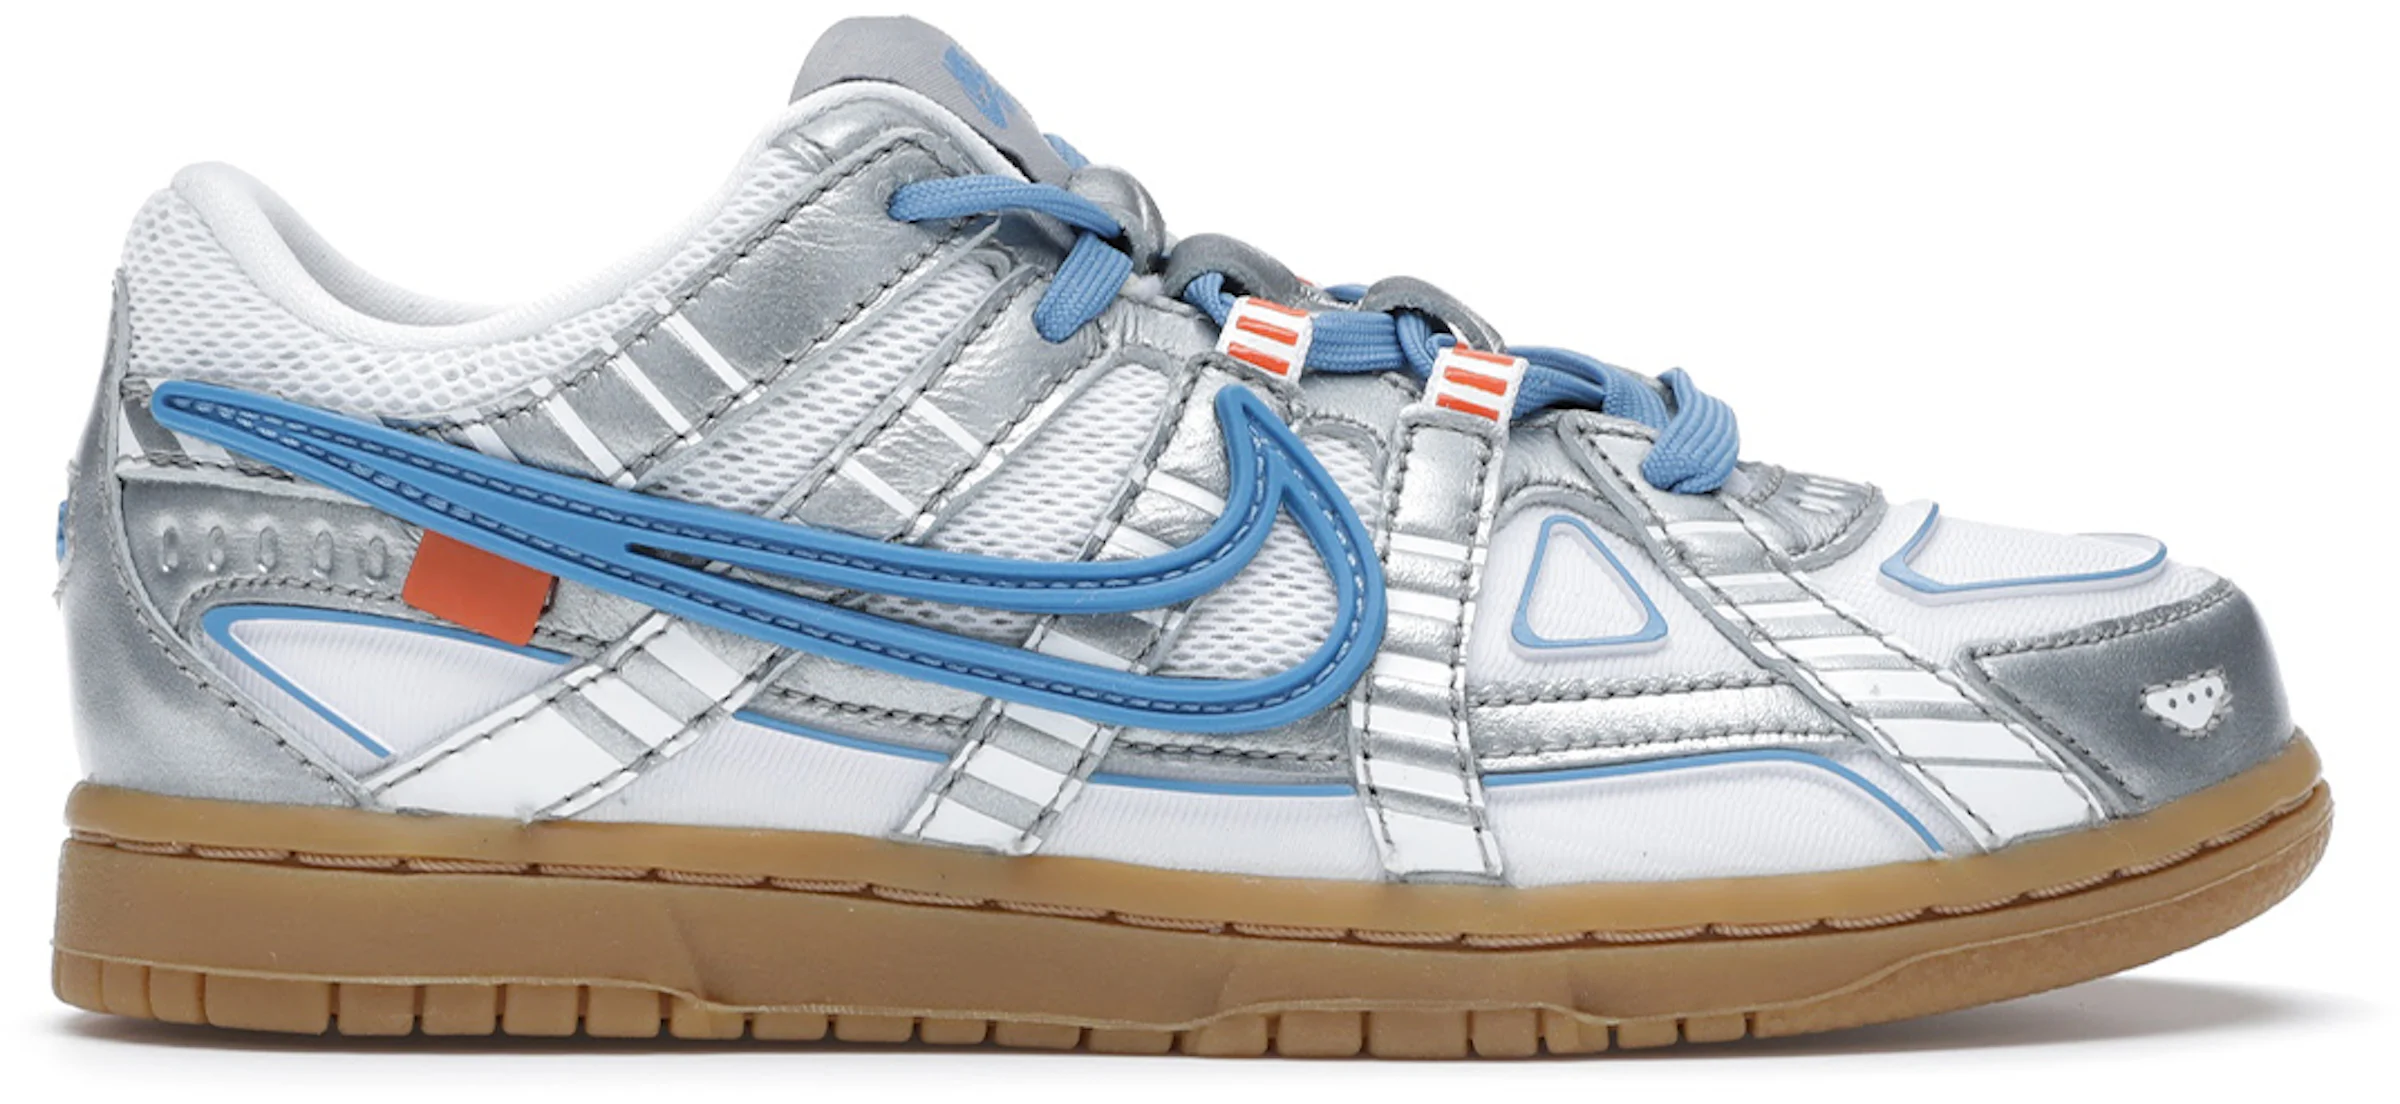 Nike Air Rubber Dunk Off-White University Blue (PS) Kids' - CW7410-100 - US